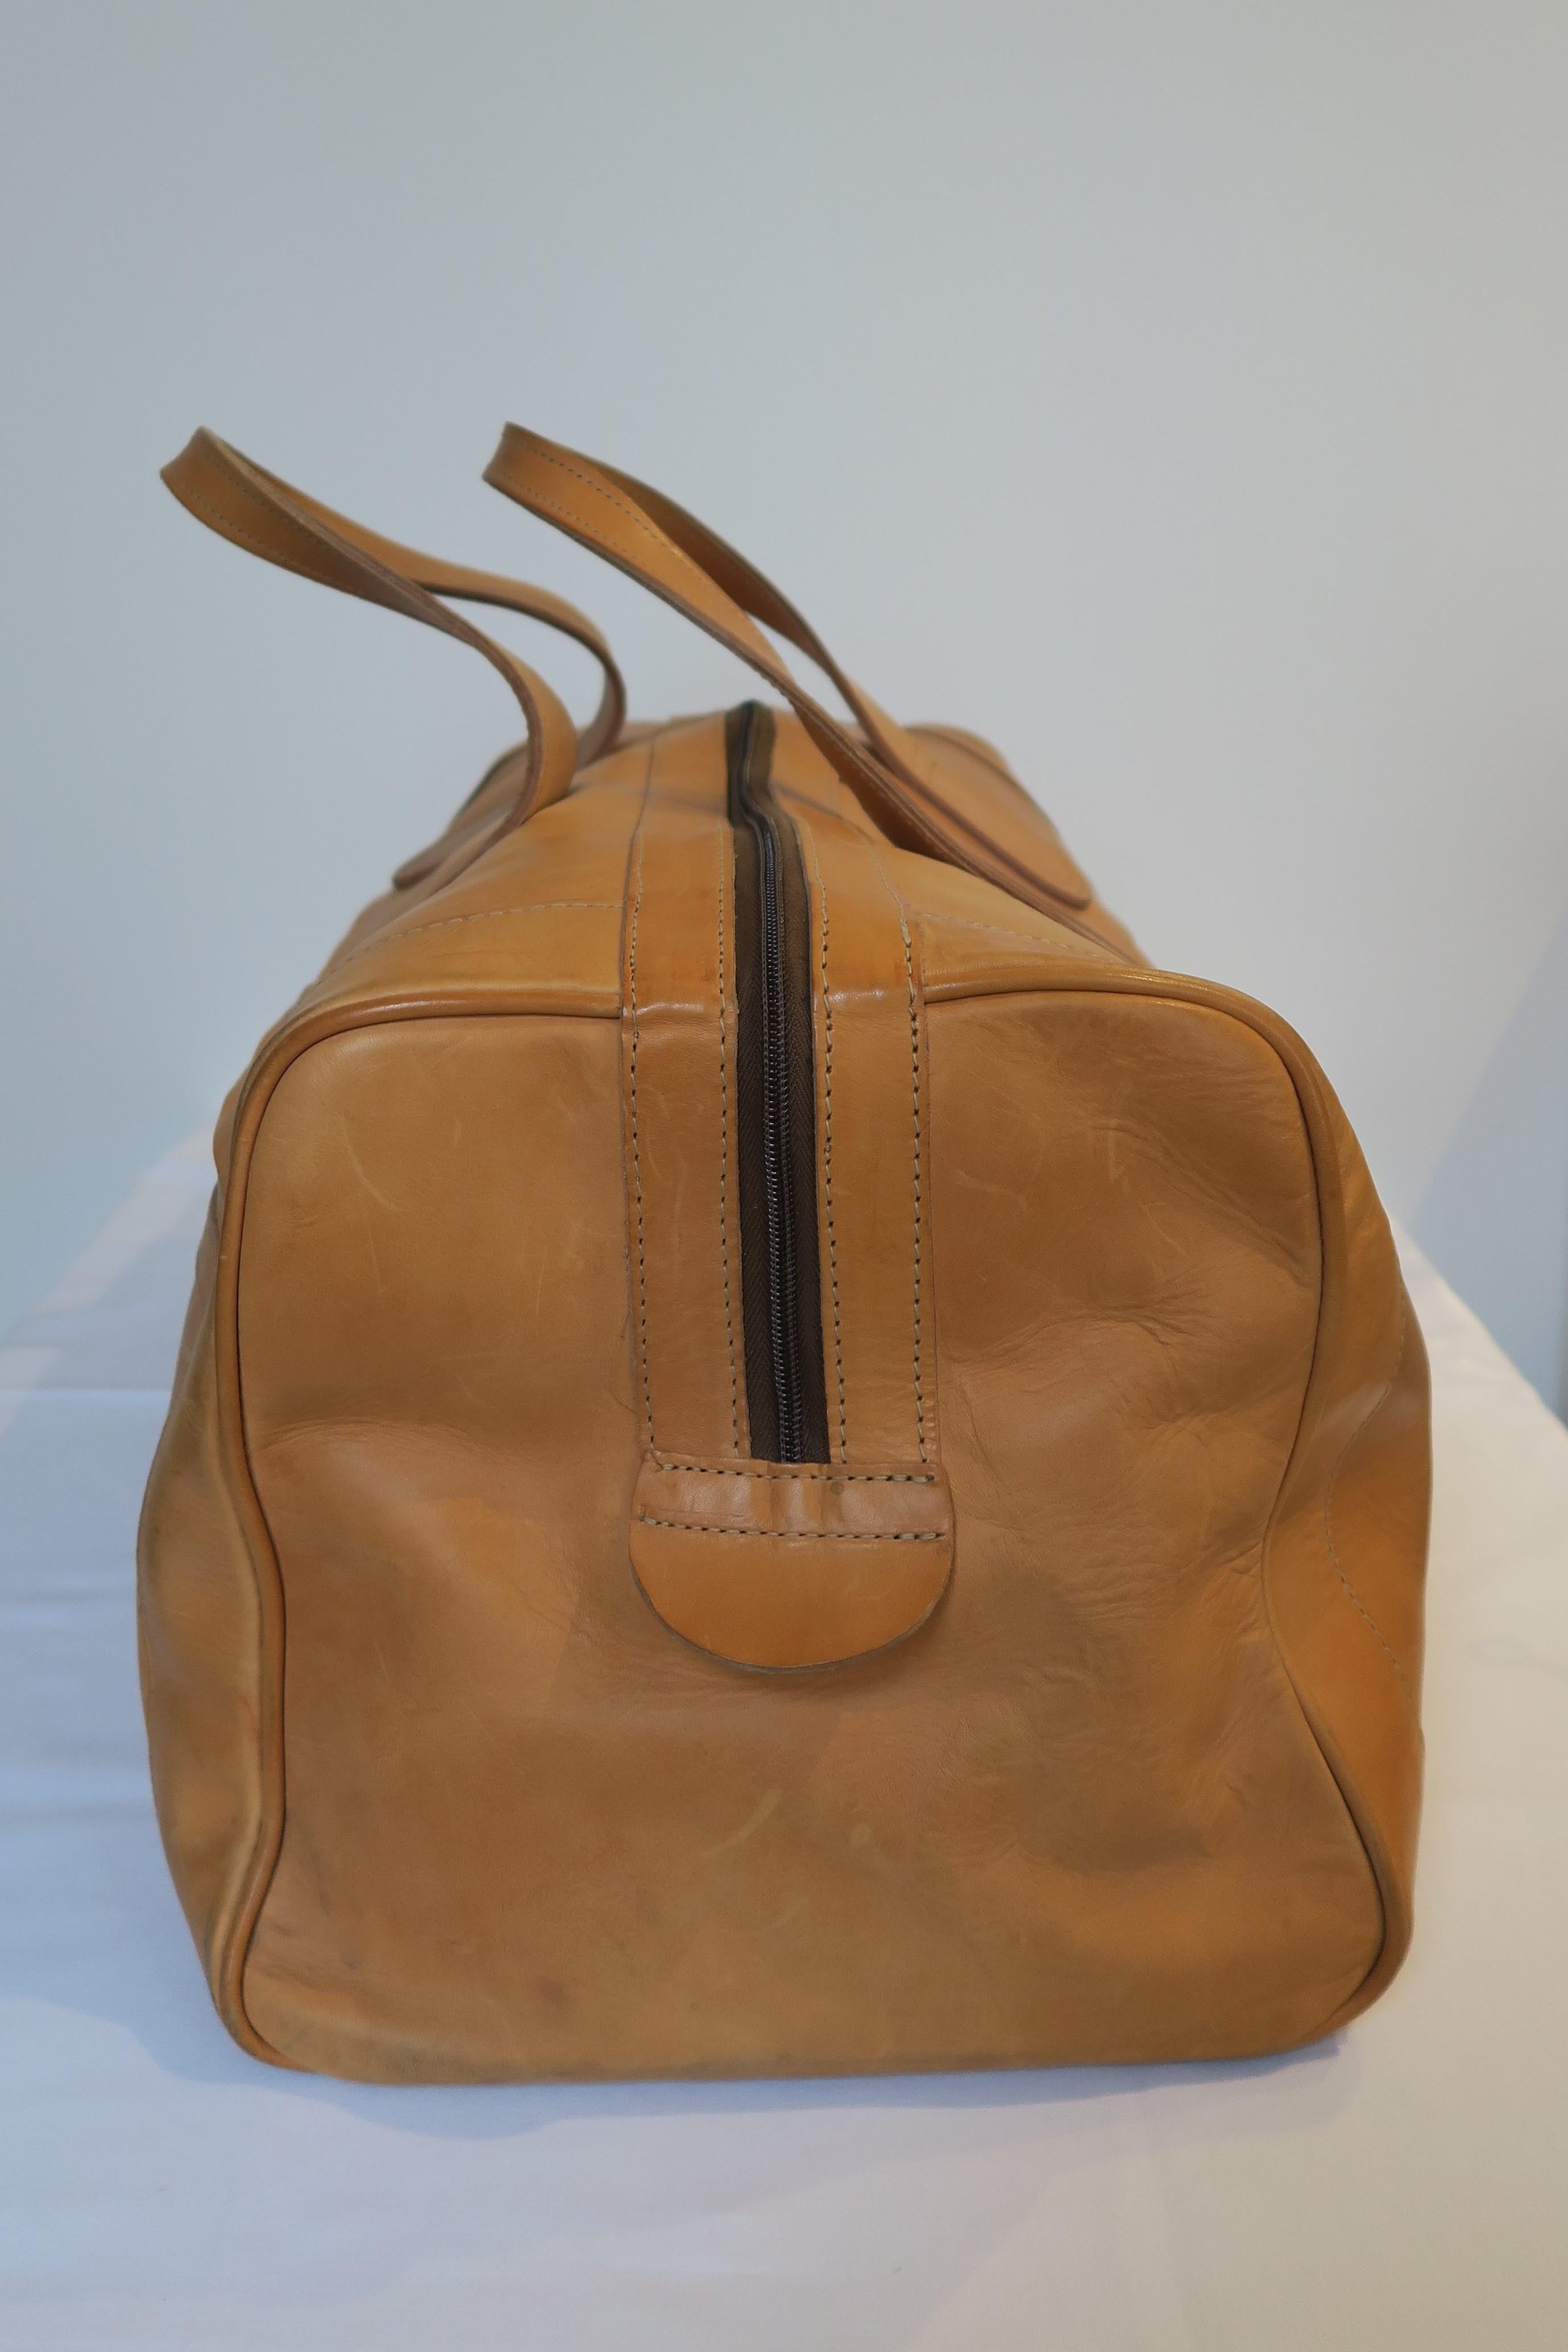 The item on sale is a dreamy weekender/travel bag made from beautiful light leather. All the handles, zippers and flaps look untouched, no stains or marks from grabbing. The bottom is still clean except some minor water stains depicted in the